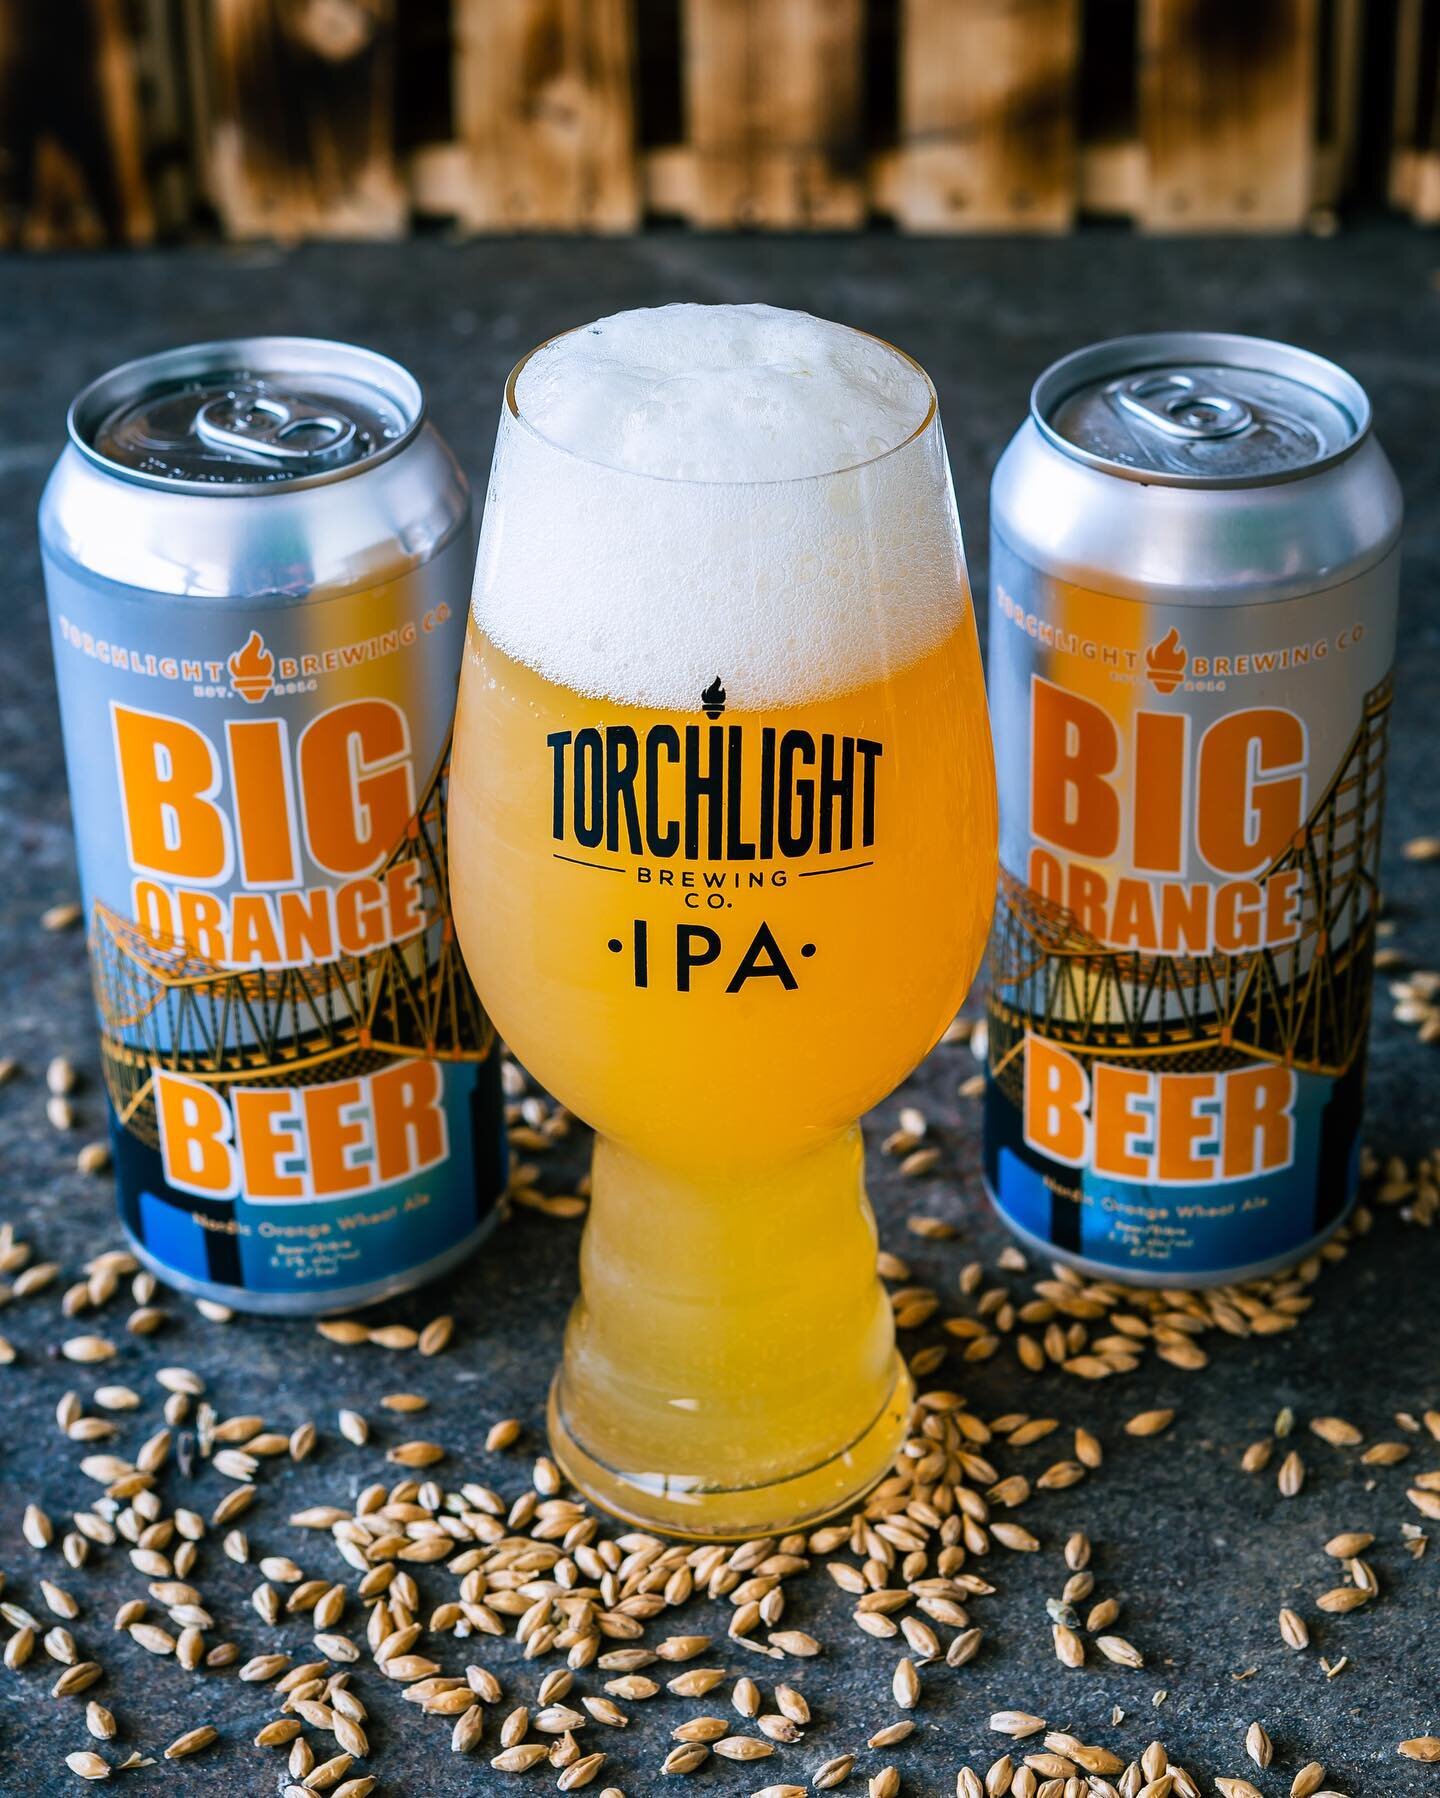 NEW BEER; BOB IS HERE!
We would like to introduce you two our newest fruit beer of the summer. The Big Orange Beer is named for our local iconic Big Orange Bridge and is jam packed full of juicy orange flavour! This one is sure to pair beautifully wi